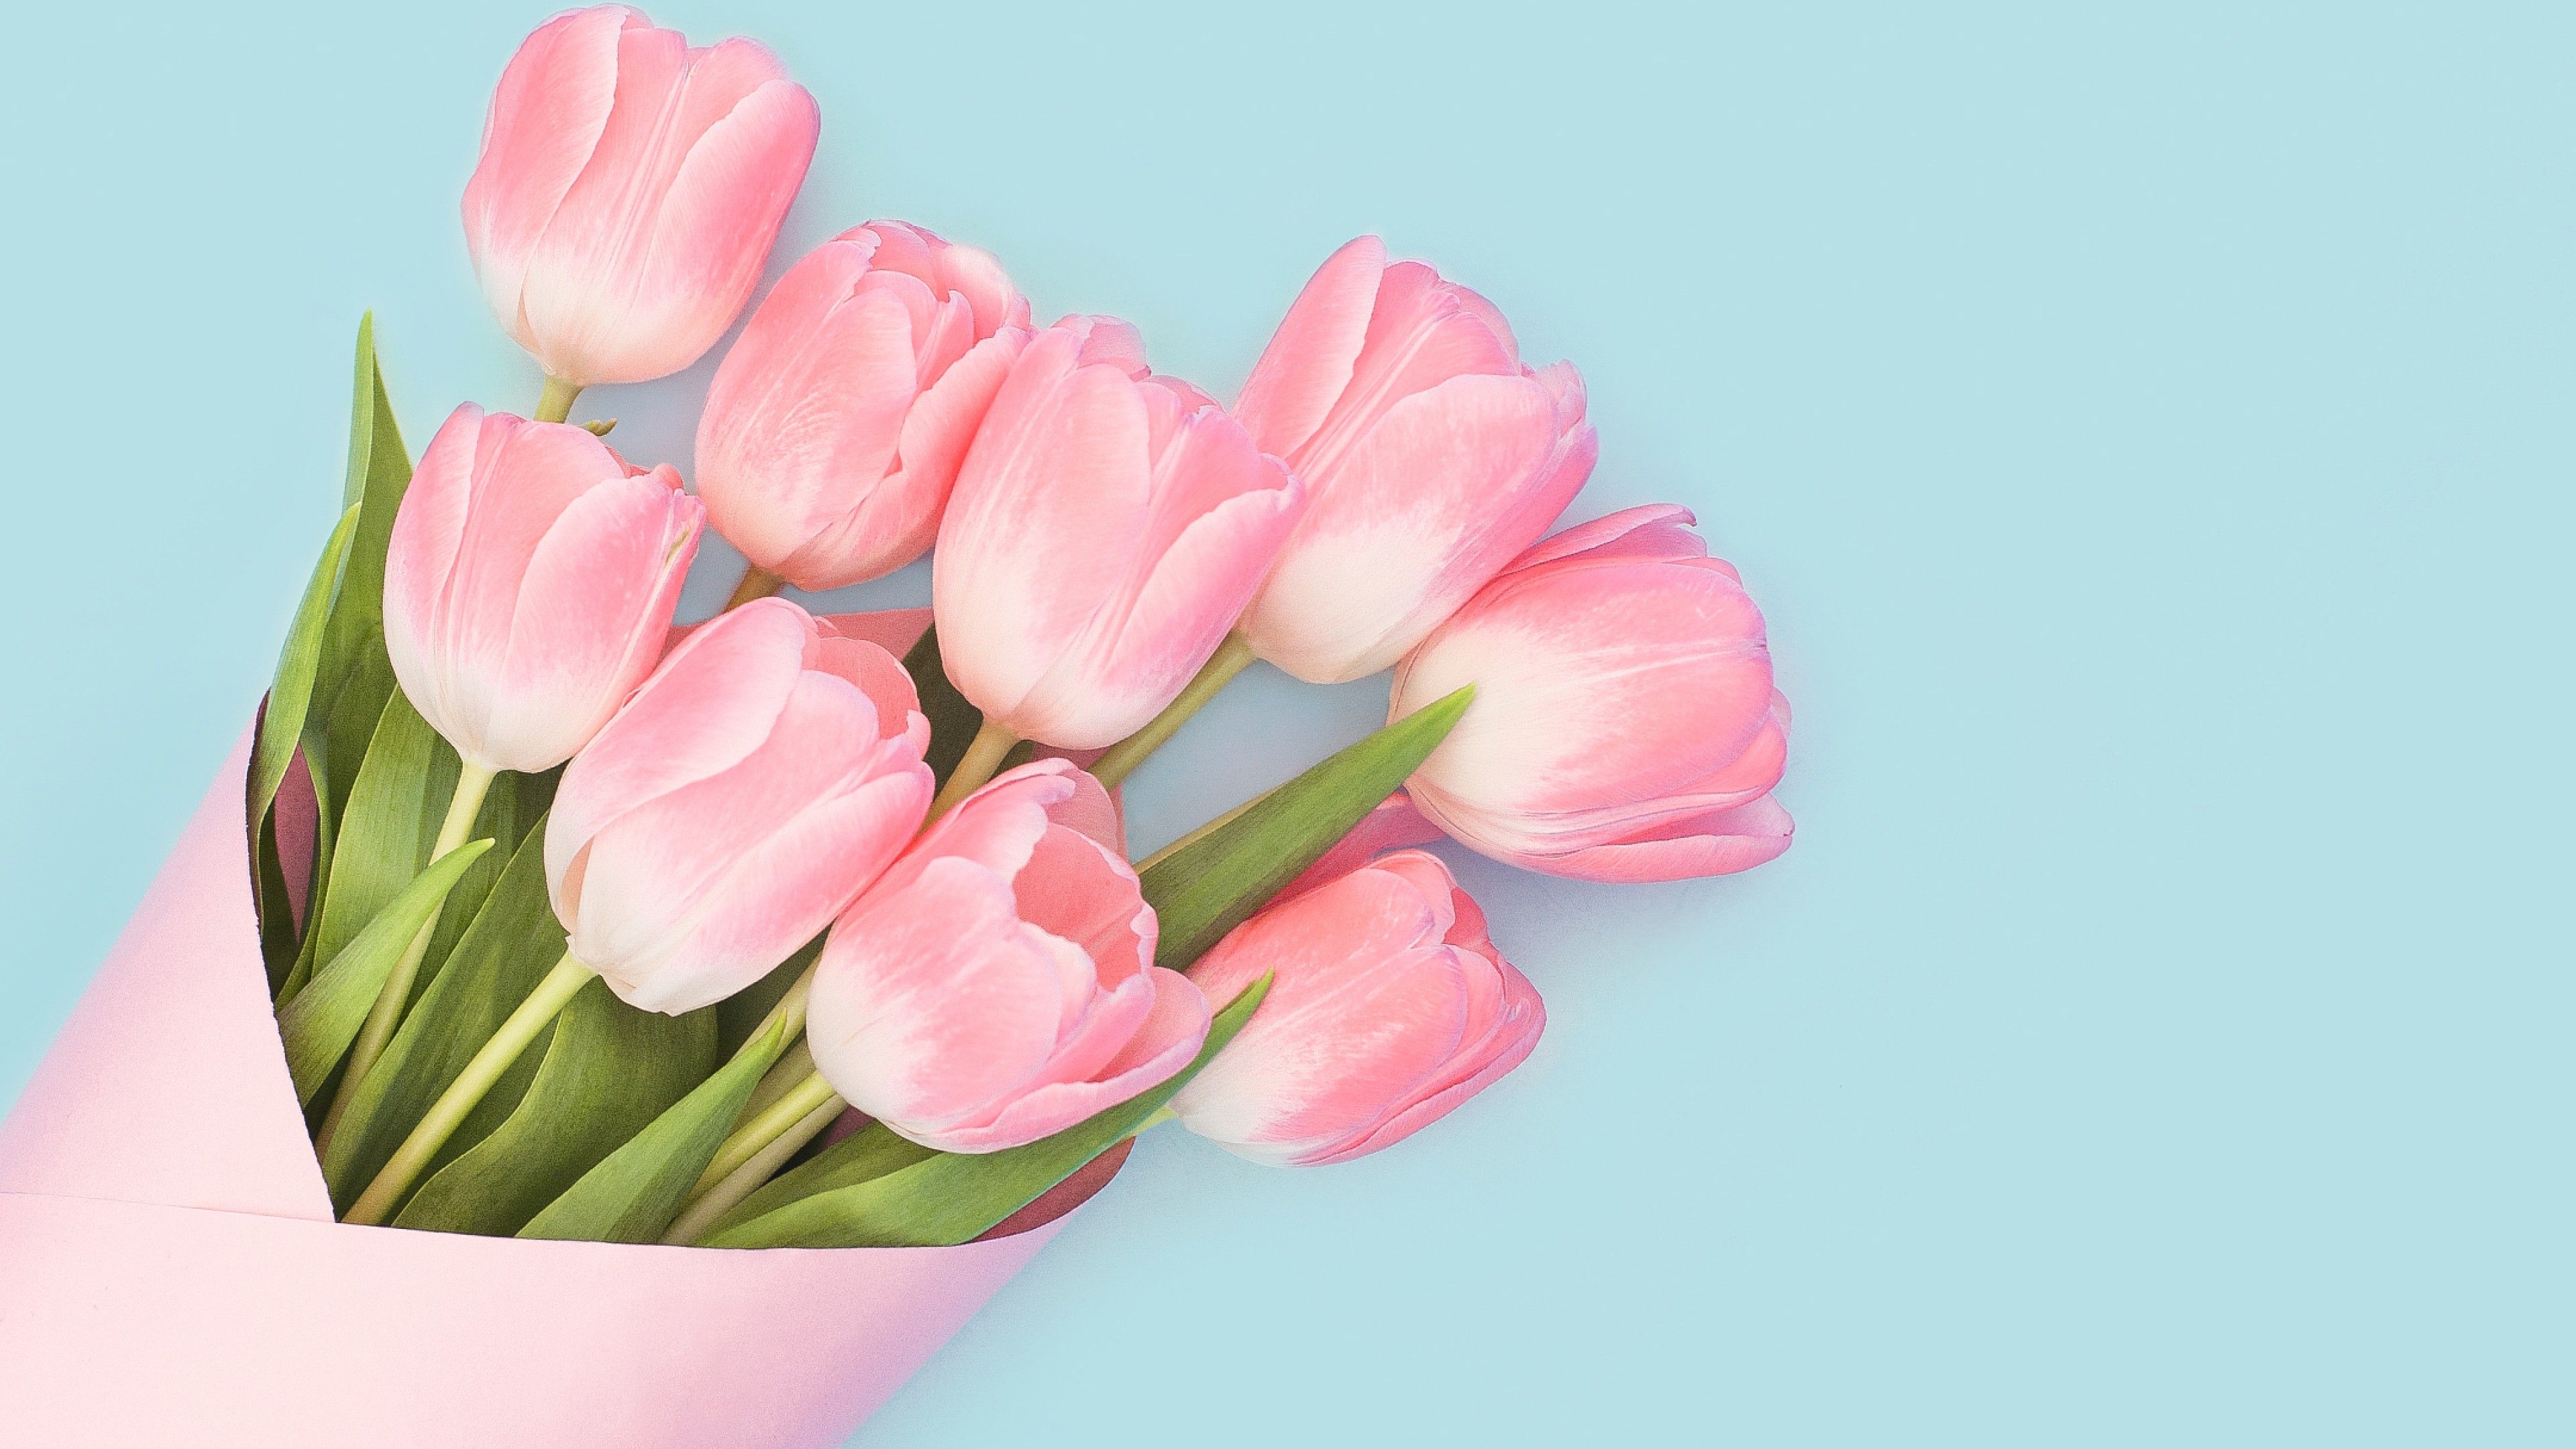 Free Download Beautiful Pink Tulips Flower Wallpaper for Desktop and Mobiles 4K Ultra HD